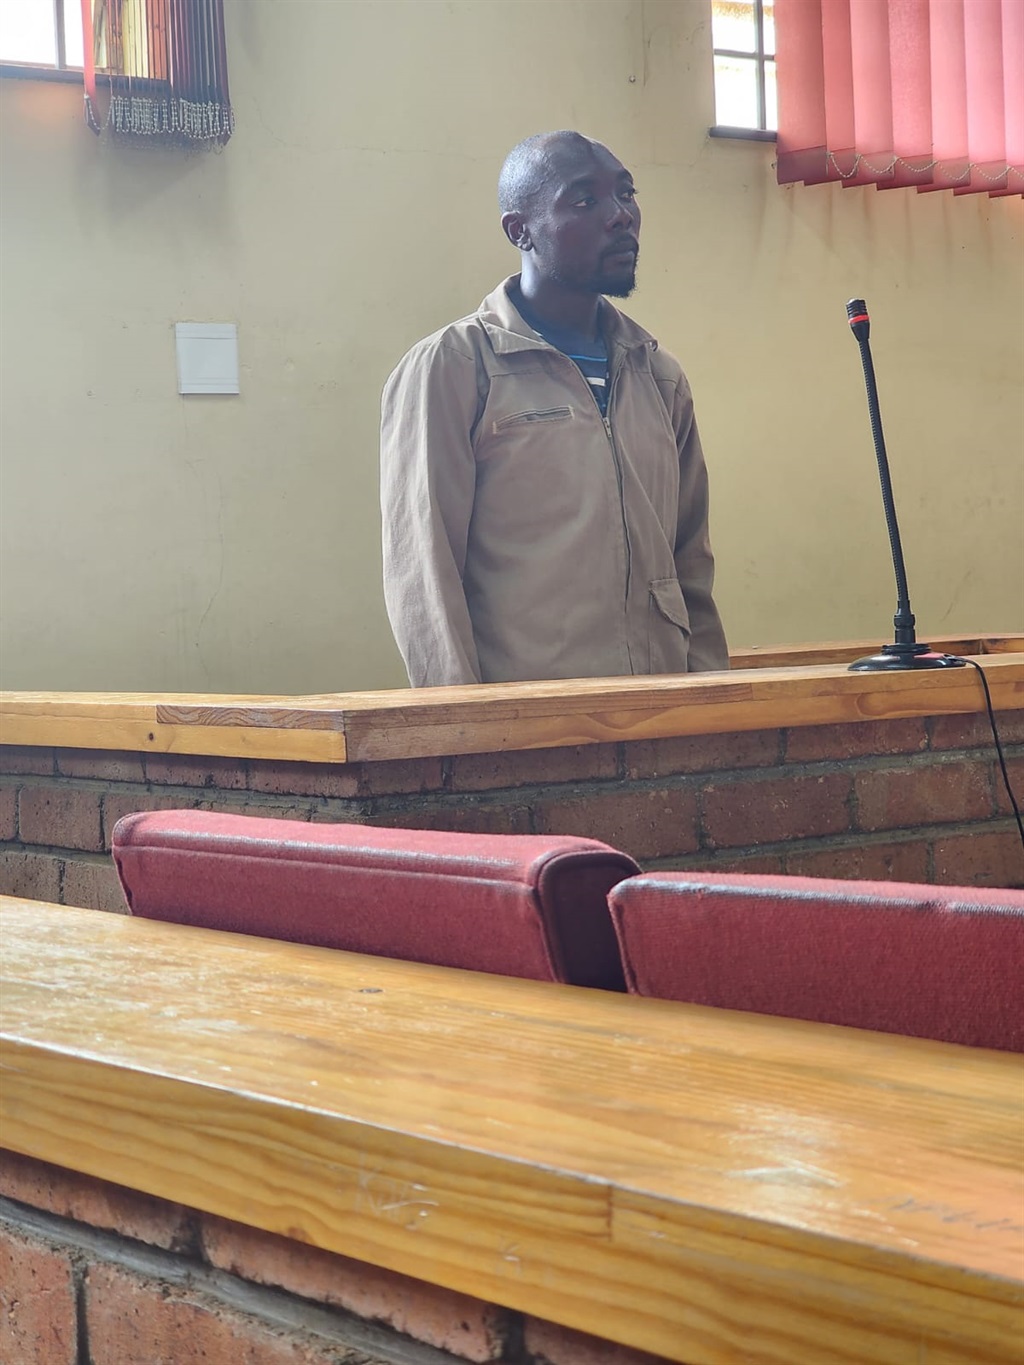 Promise Lebepe (30) who allegedly assaulted a 30-year-old female nurse at Relela Clinic outside Bolobedu, Limpopo on Friday, 21 April has appeared before court. Photo by Judas Sekwela
